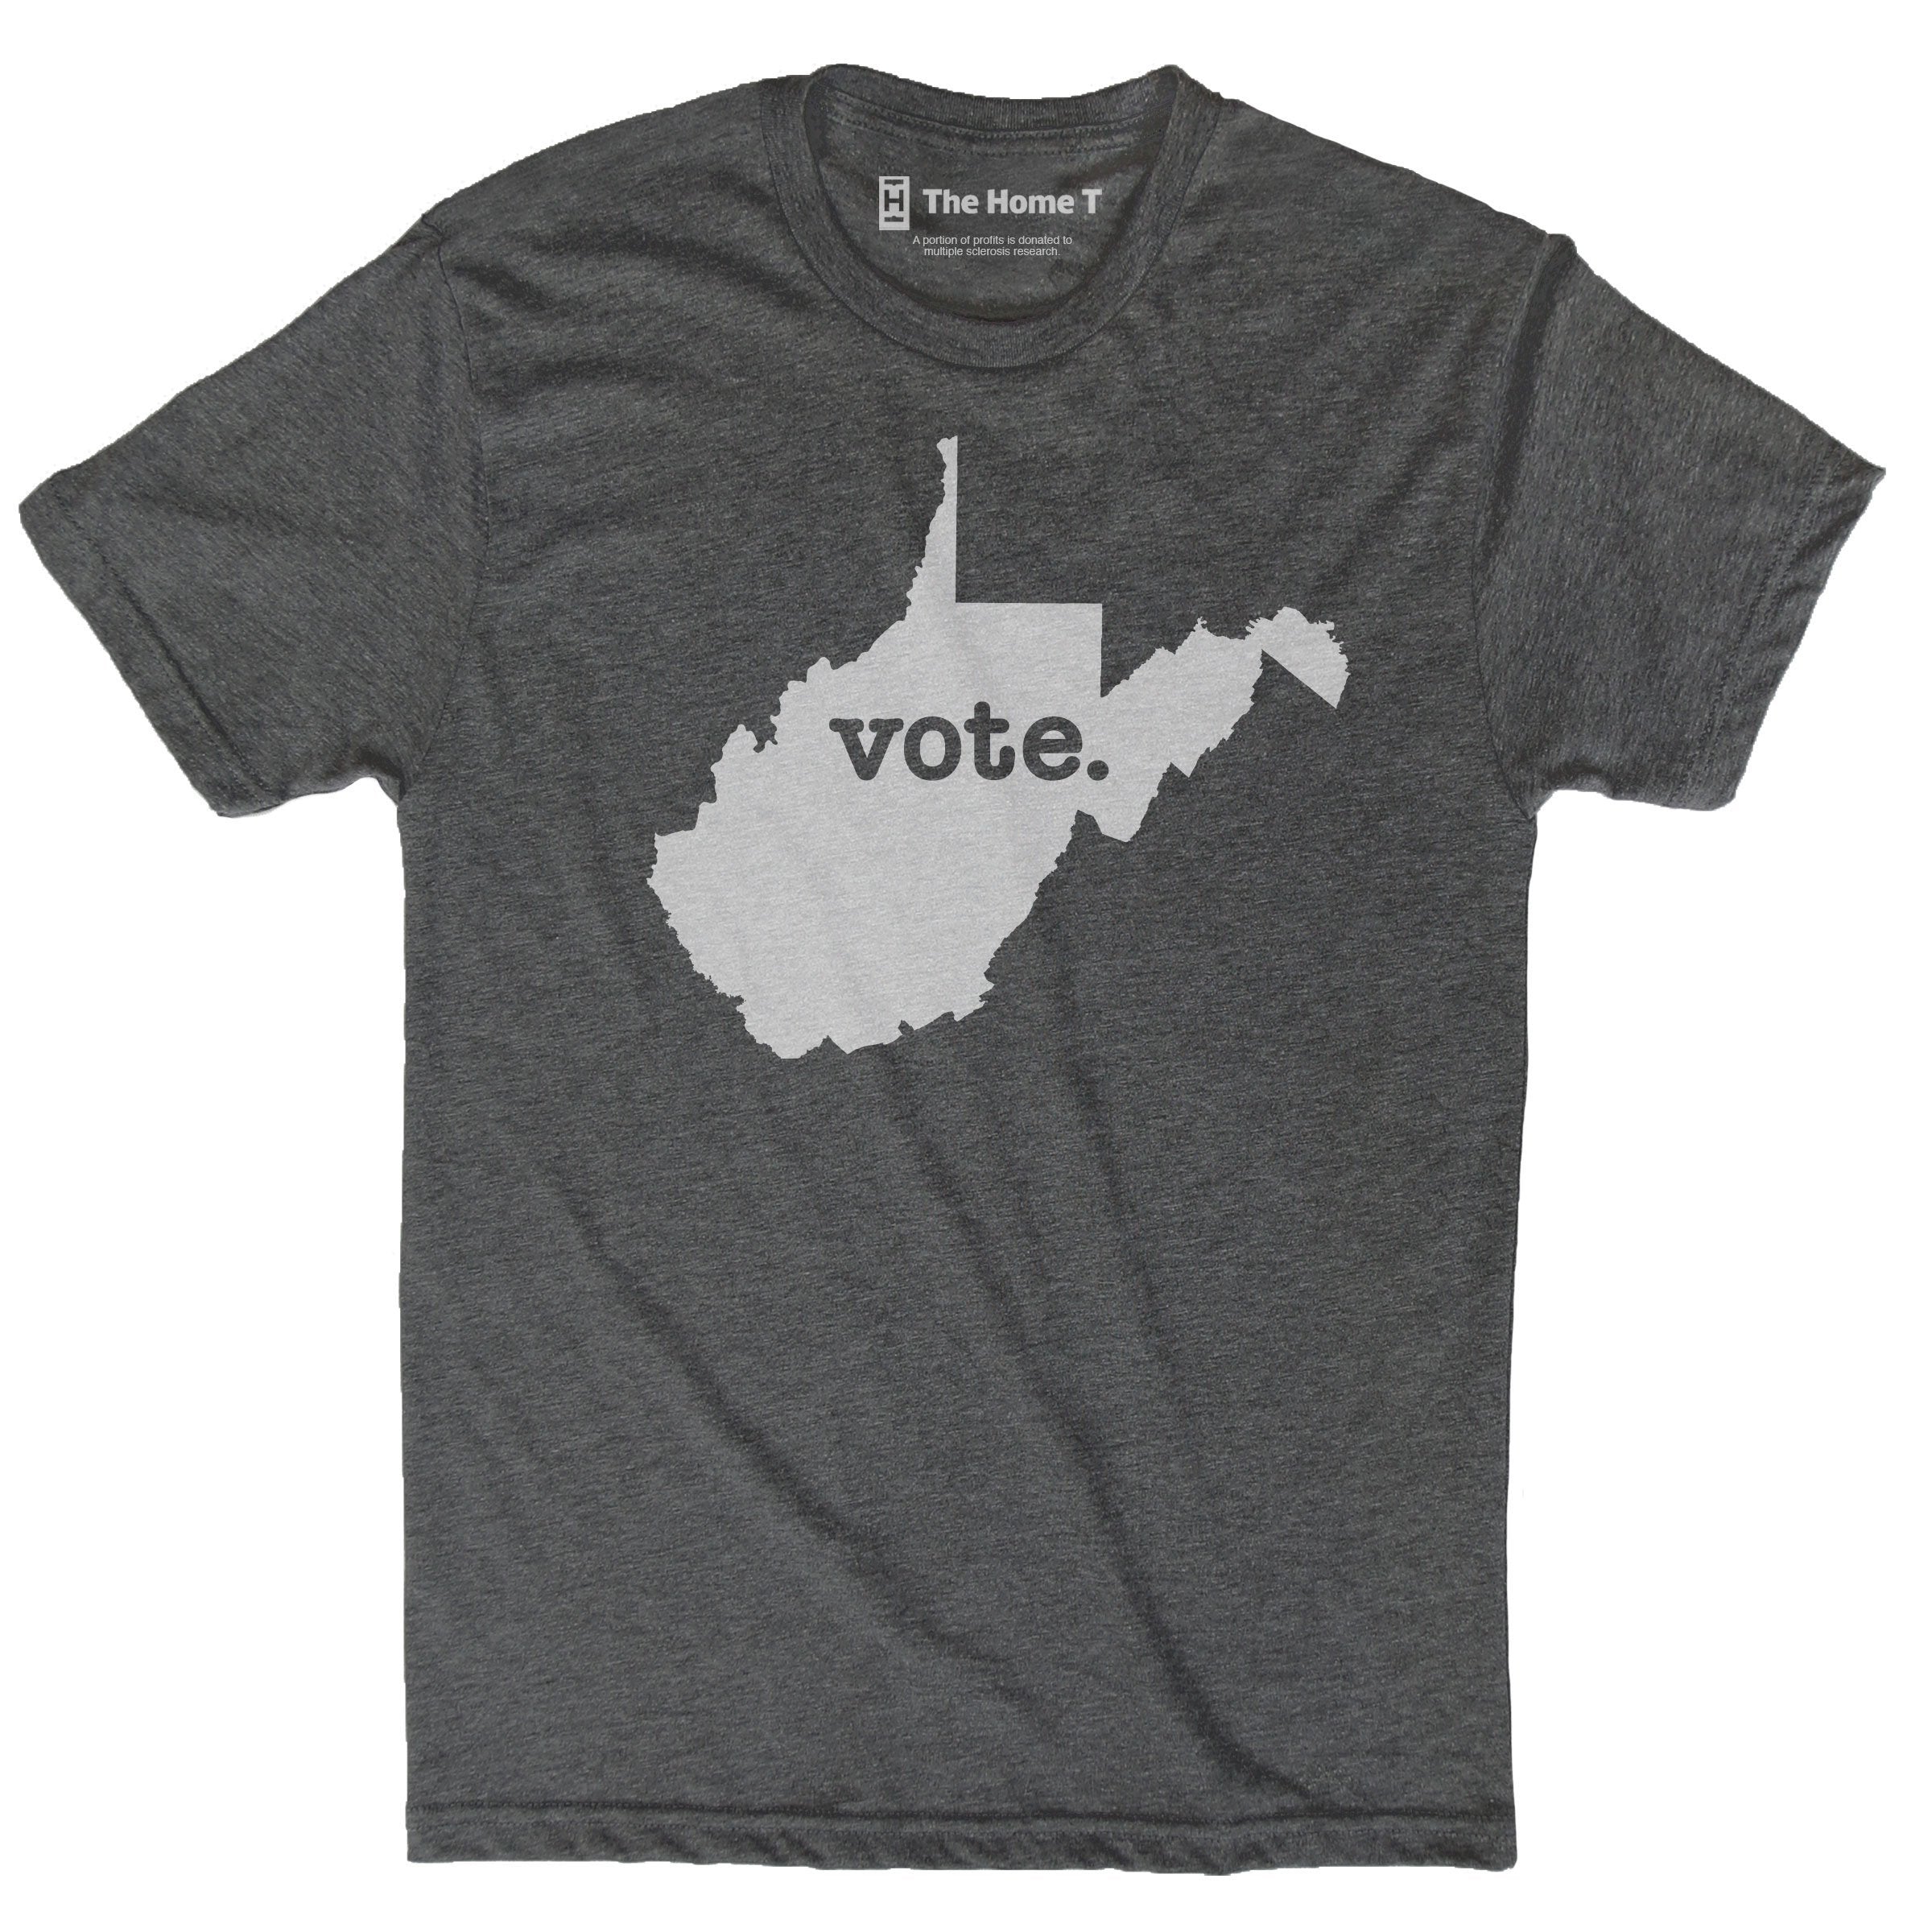 West Virginia Vote Home T Vote The Home T XS Grey